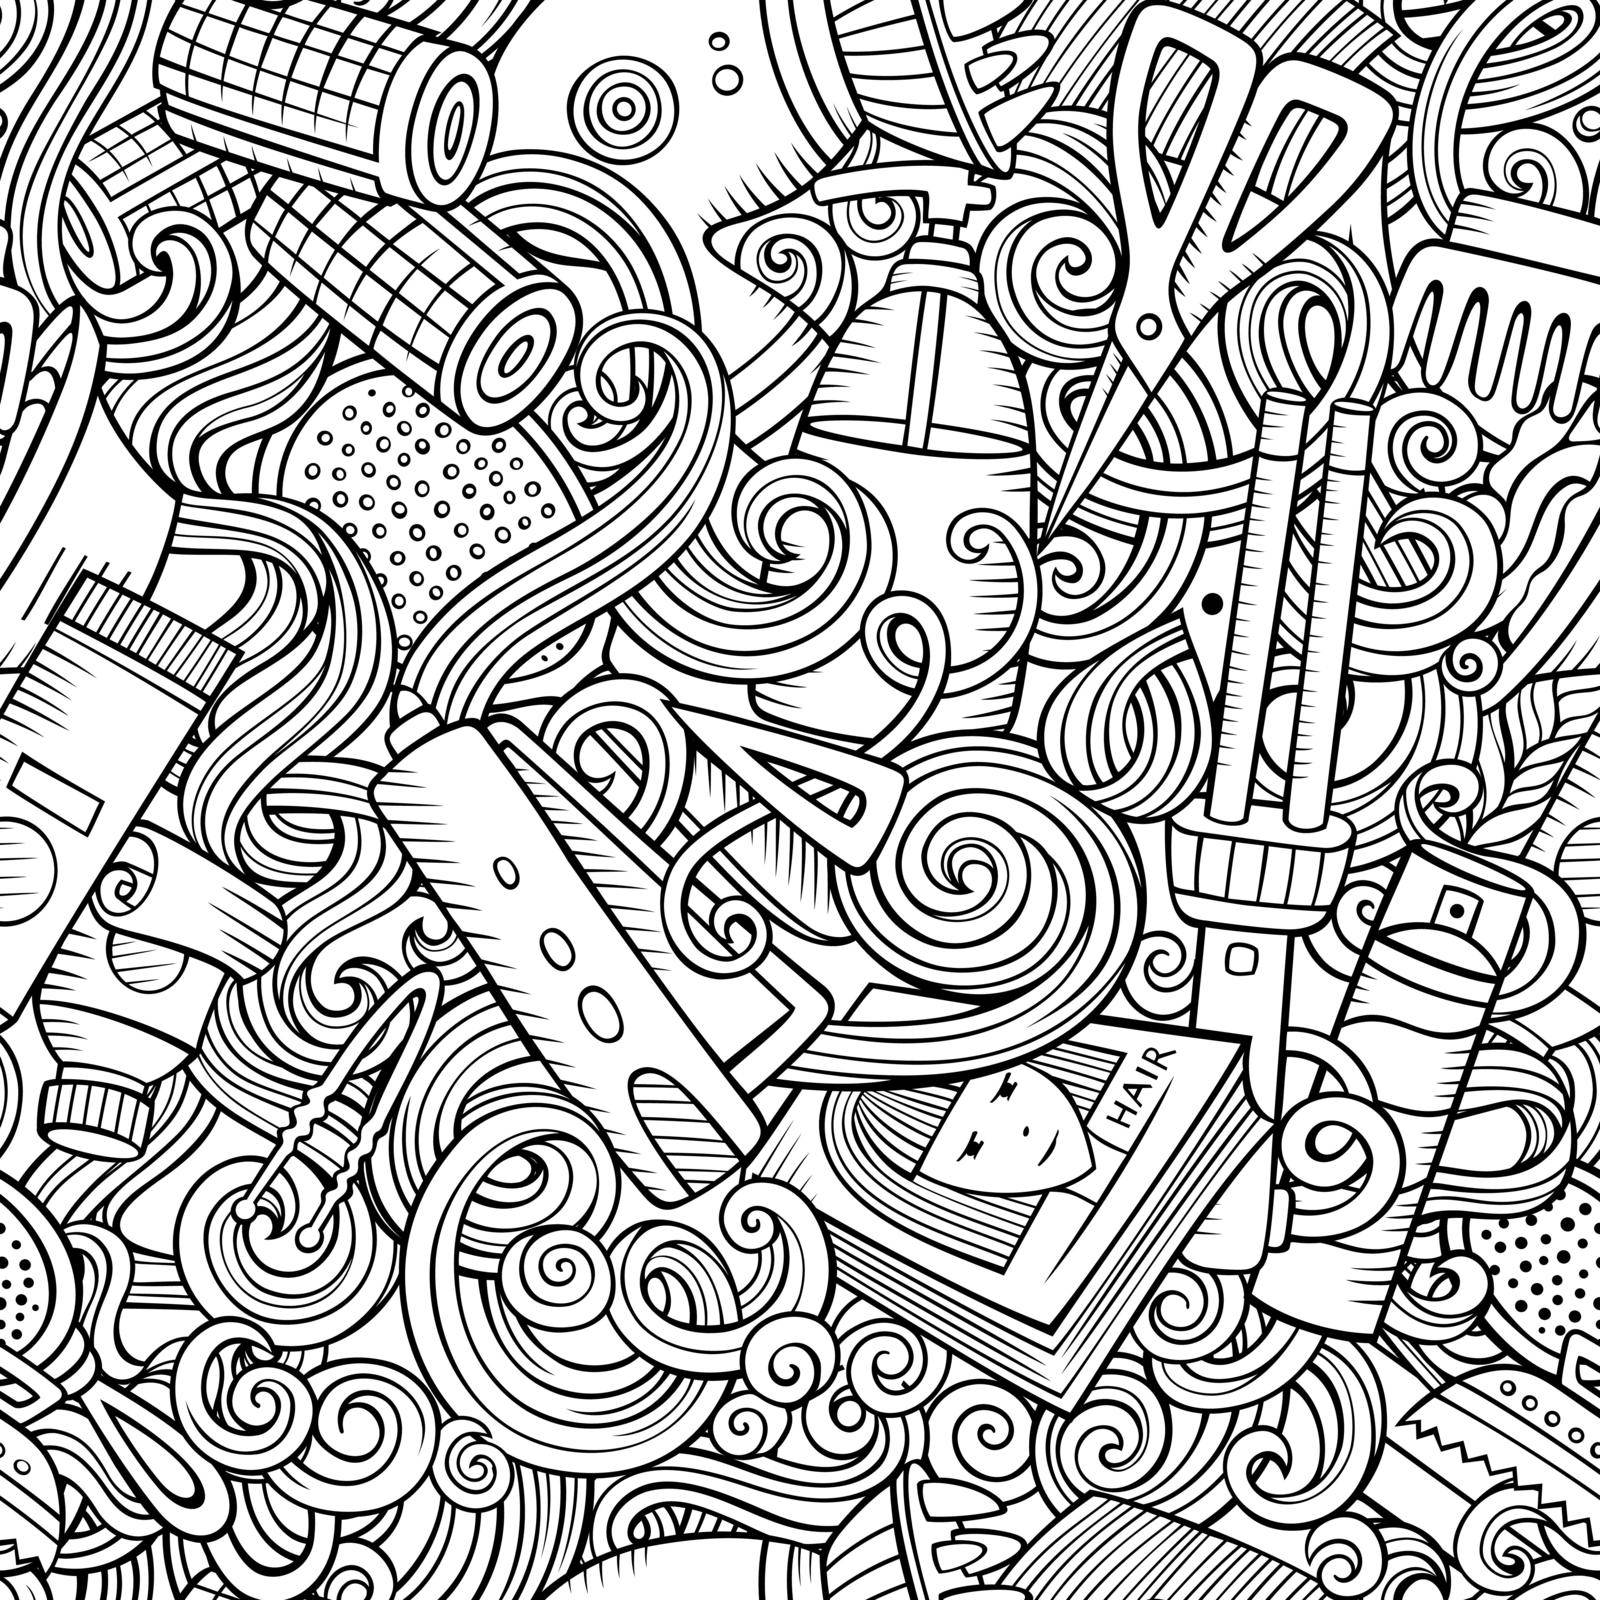 Hair Salon hand drawn doodles seamless pattern. Hairstyle background. Cartoon hairdressing coloring page design. Sketchy vector barbershop illustration